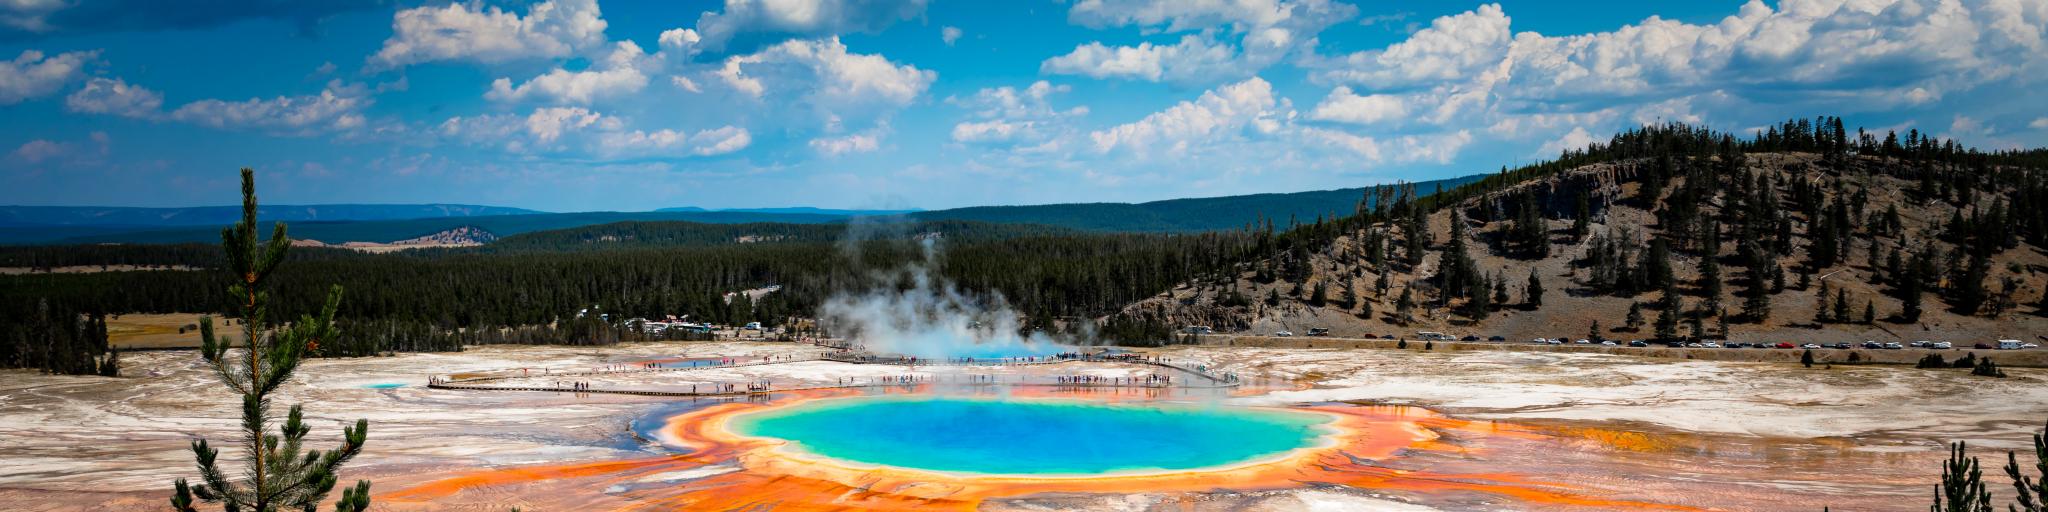 A panoramic view of the Grand Prismatic Spring in Yellowstone National Park show's that the water's color is a mix of orange, yellow, green, and blue.